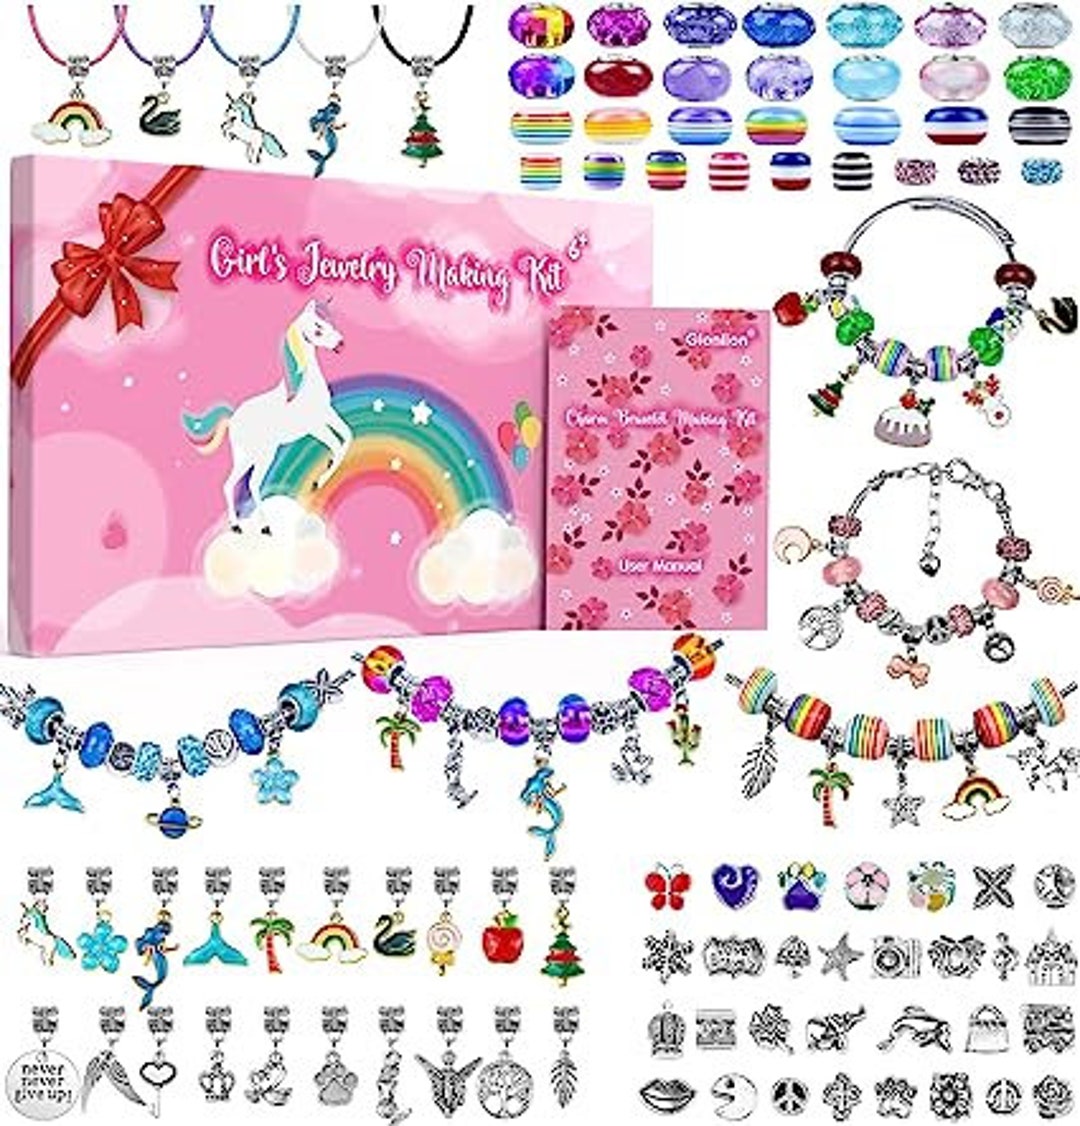 Charm Bracelet Making Kit Mermaid Charms For Bracelets Making DIY Bracelets  Jewelry Making Supplies Include Snake Chains Charms